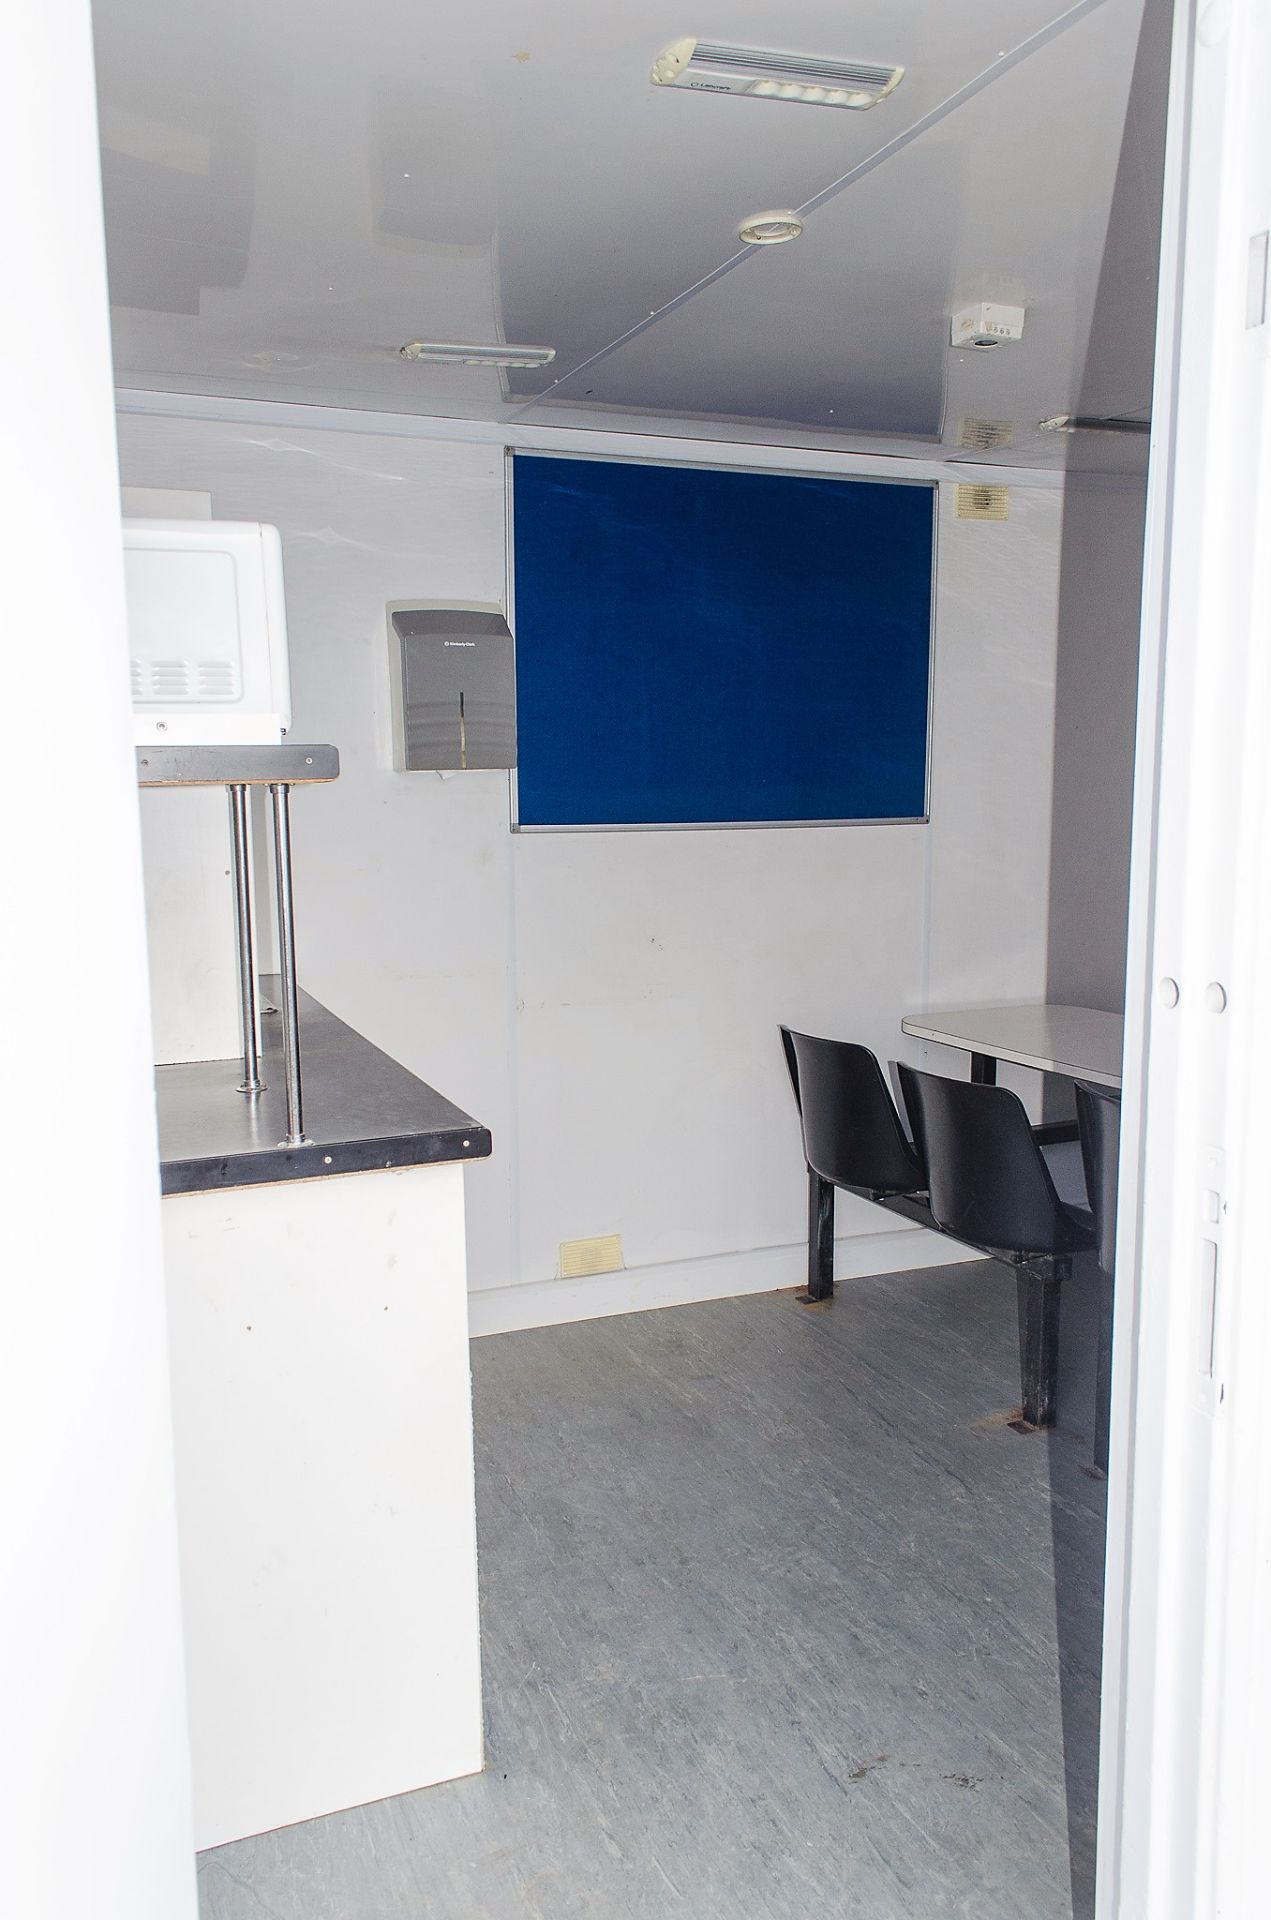 25 ft x 9 ft steel anti-vandal welfare site unit Comprising of: Office, canteen, drying room, toilet - Image 6 of 11